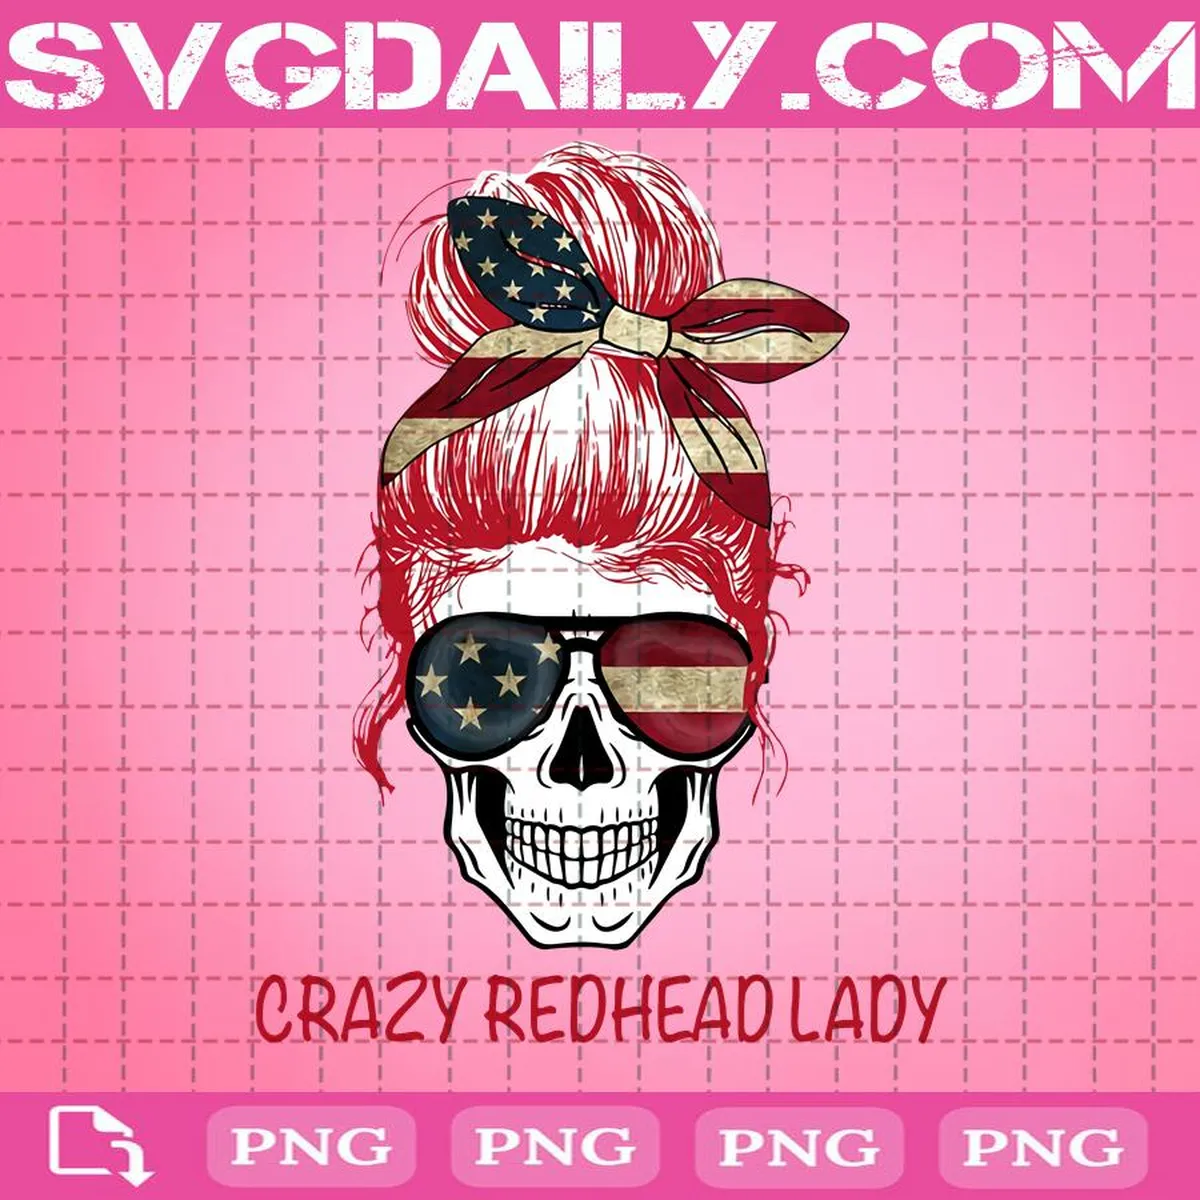 Skull Mom Crazy Redhead Lady Png, Skull Mom Png, Skull Mom Crazy Png, Skull Png, Halloween Png, Halloween Gift Png